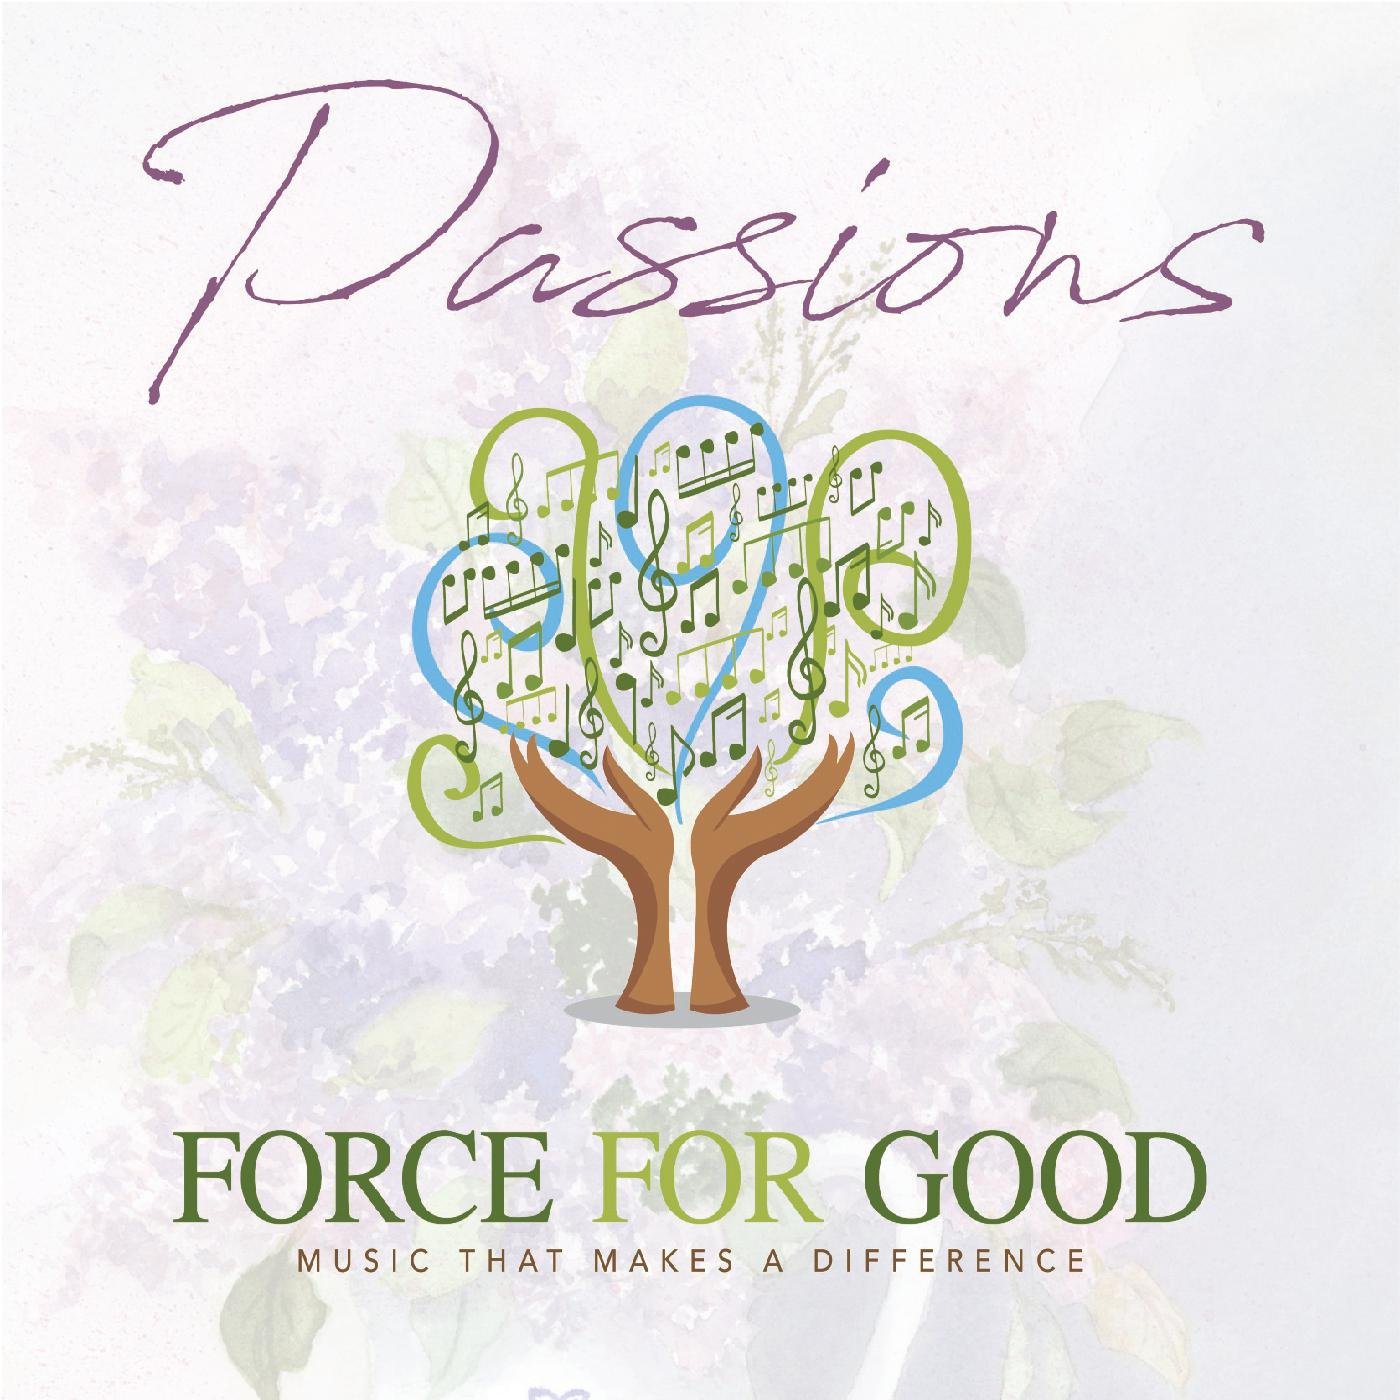 Passions cover image.jpg